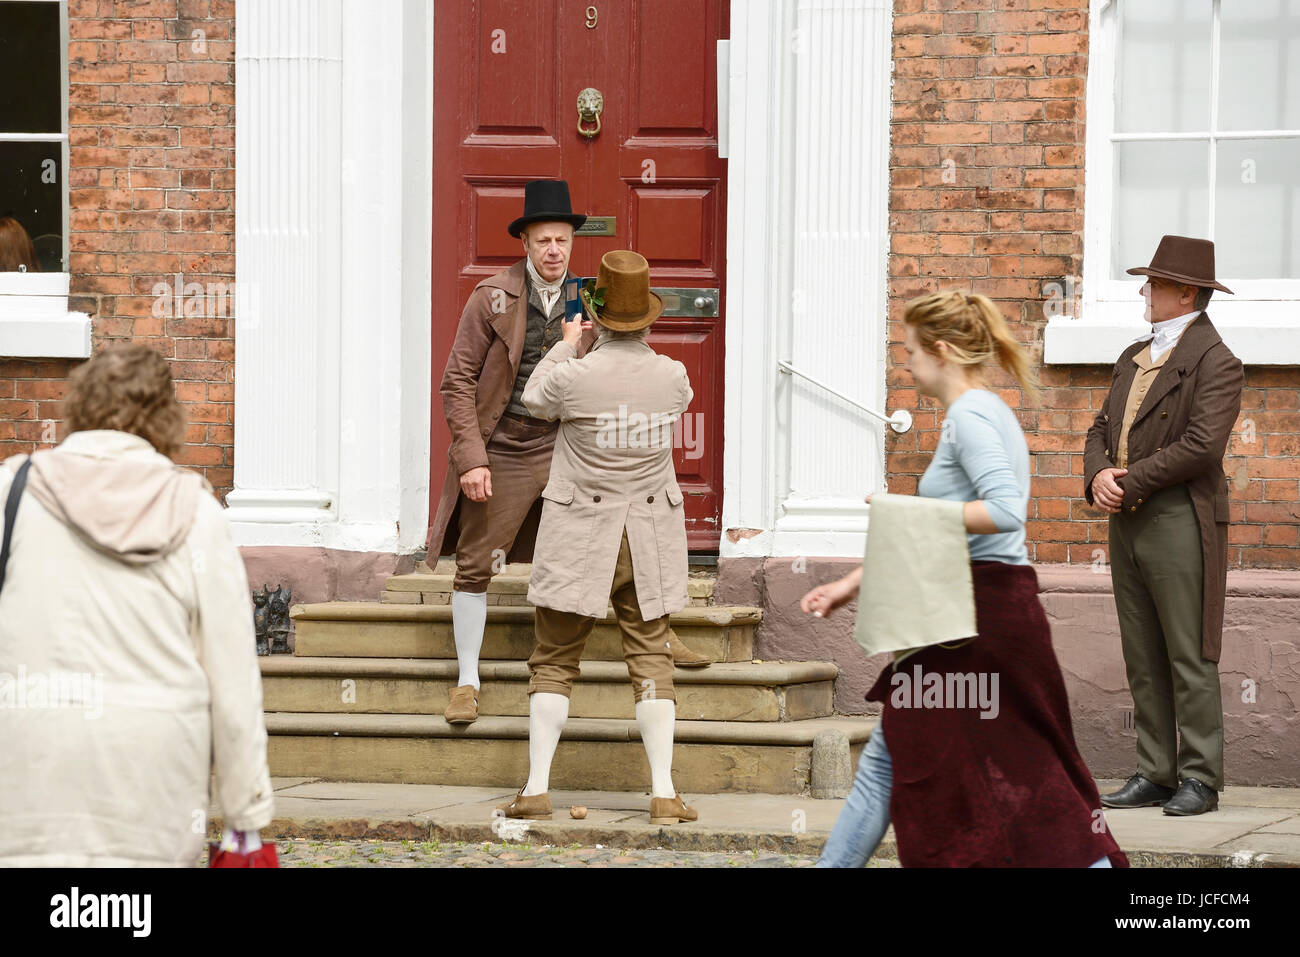 Chester, UK. 16th June, 2017. Actors in period costume take a break from filming the new Mike Leigh film Peterloo. Filming is taking place in Abbey Square and Chester Cathedral. Credit: Andrew Paterson/Alamy Live News Stock Photo